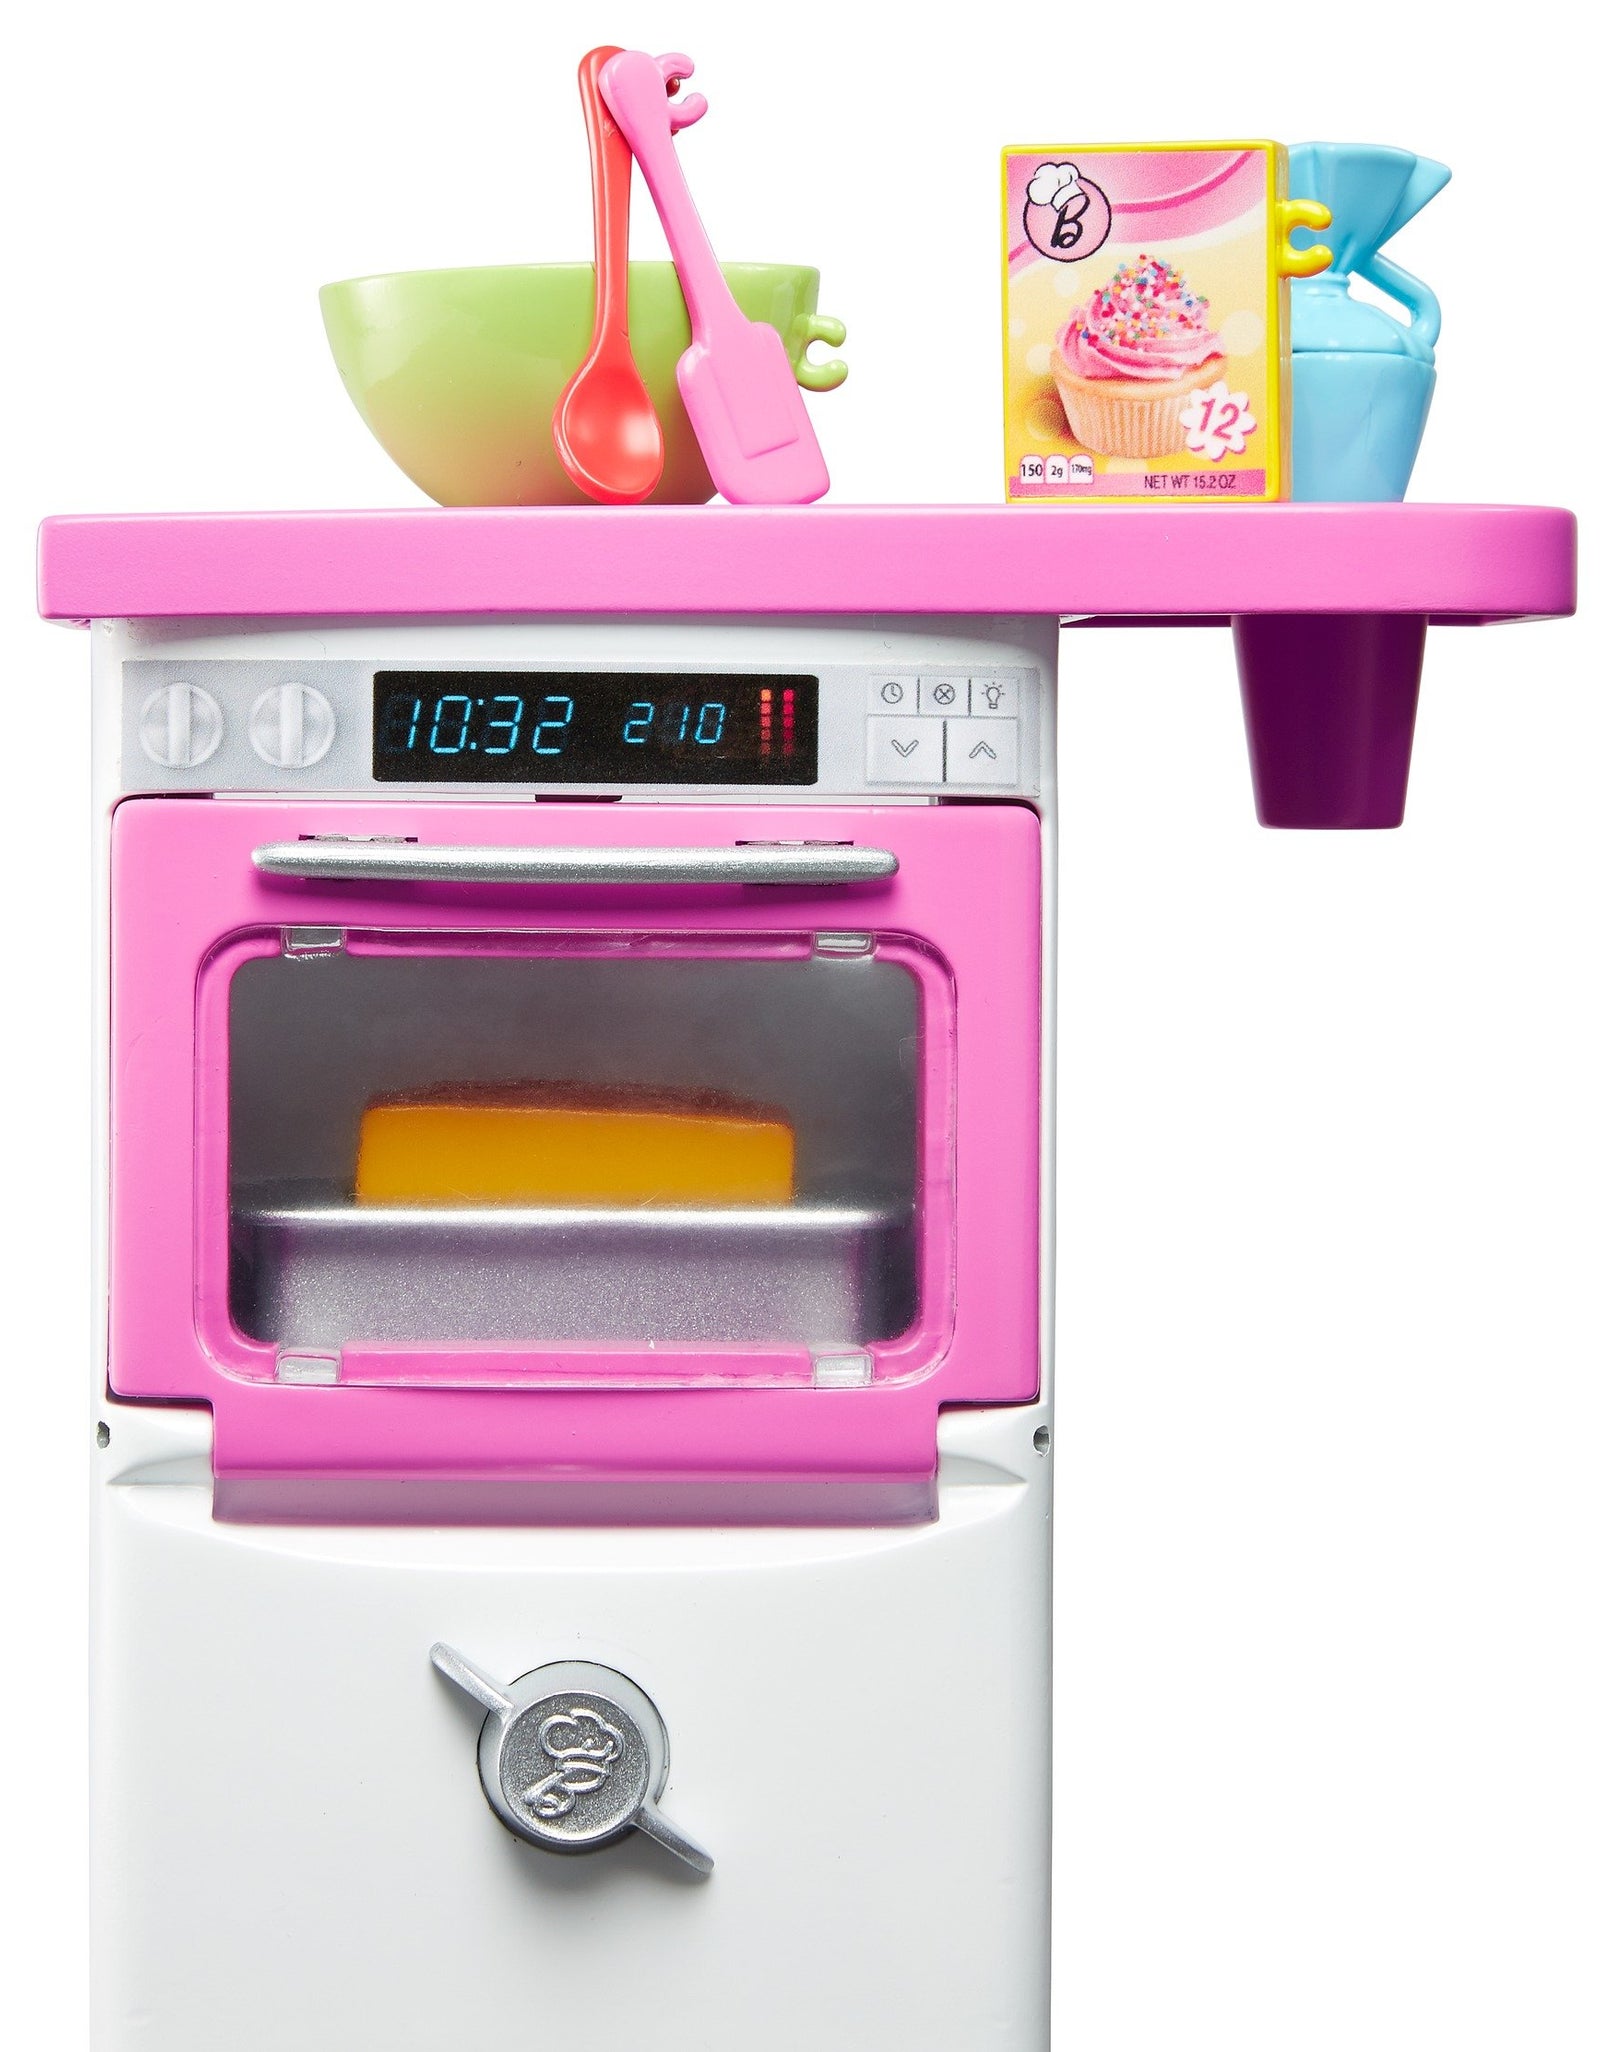 Barbie Bakery Chef Doll and Playset [Amazon Exclusive]